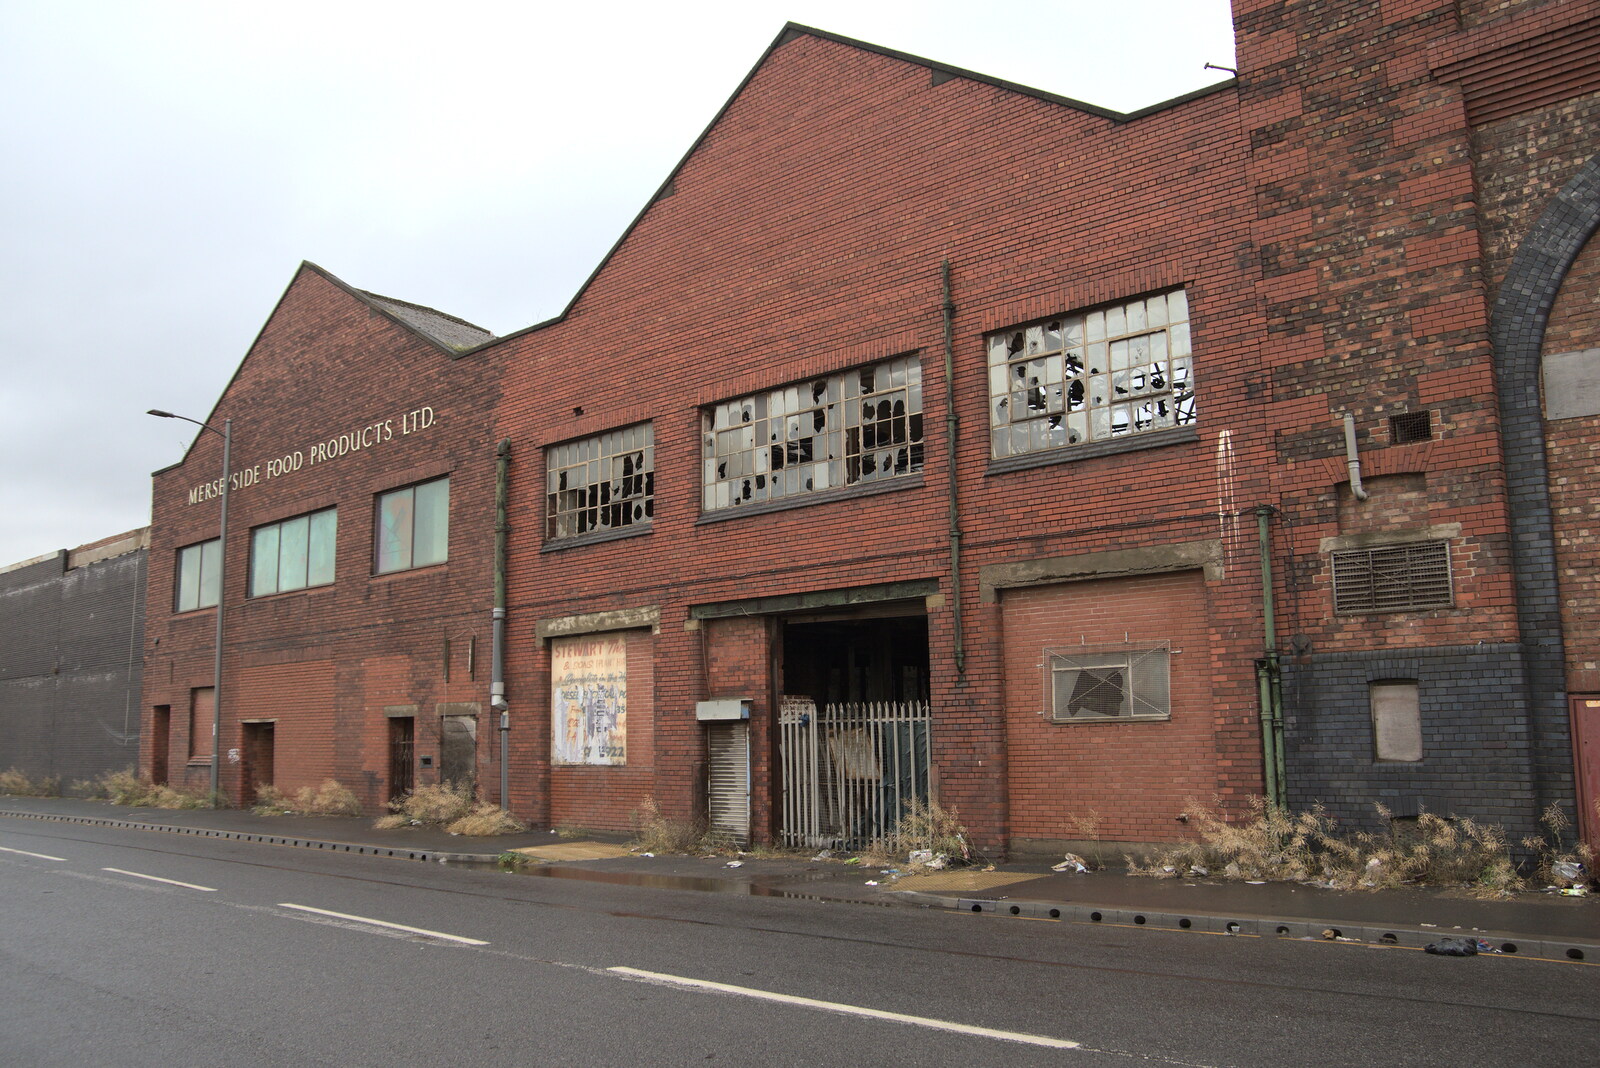 The derelict Merseyside Food Products building from Pork Pies and Dockside Dereliction, Melton Mowbray and Liverpool - 7th August 2021